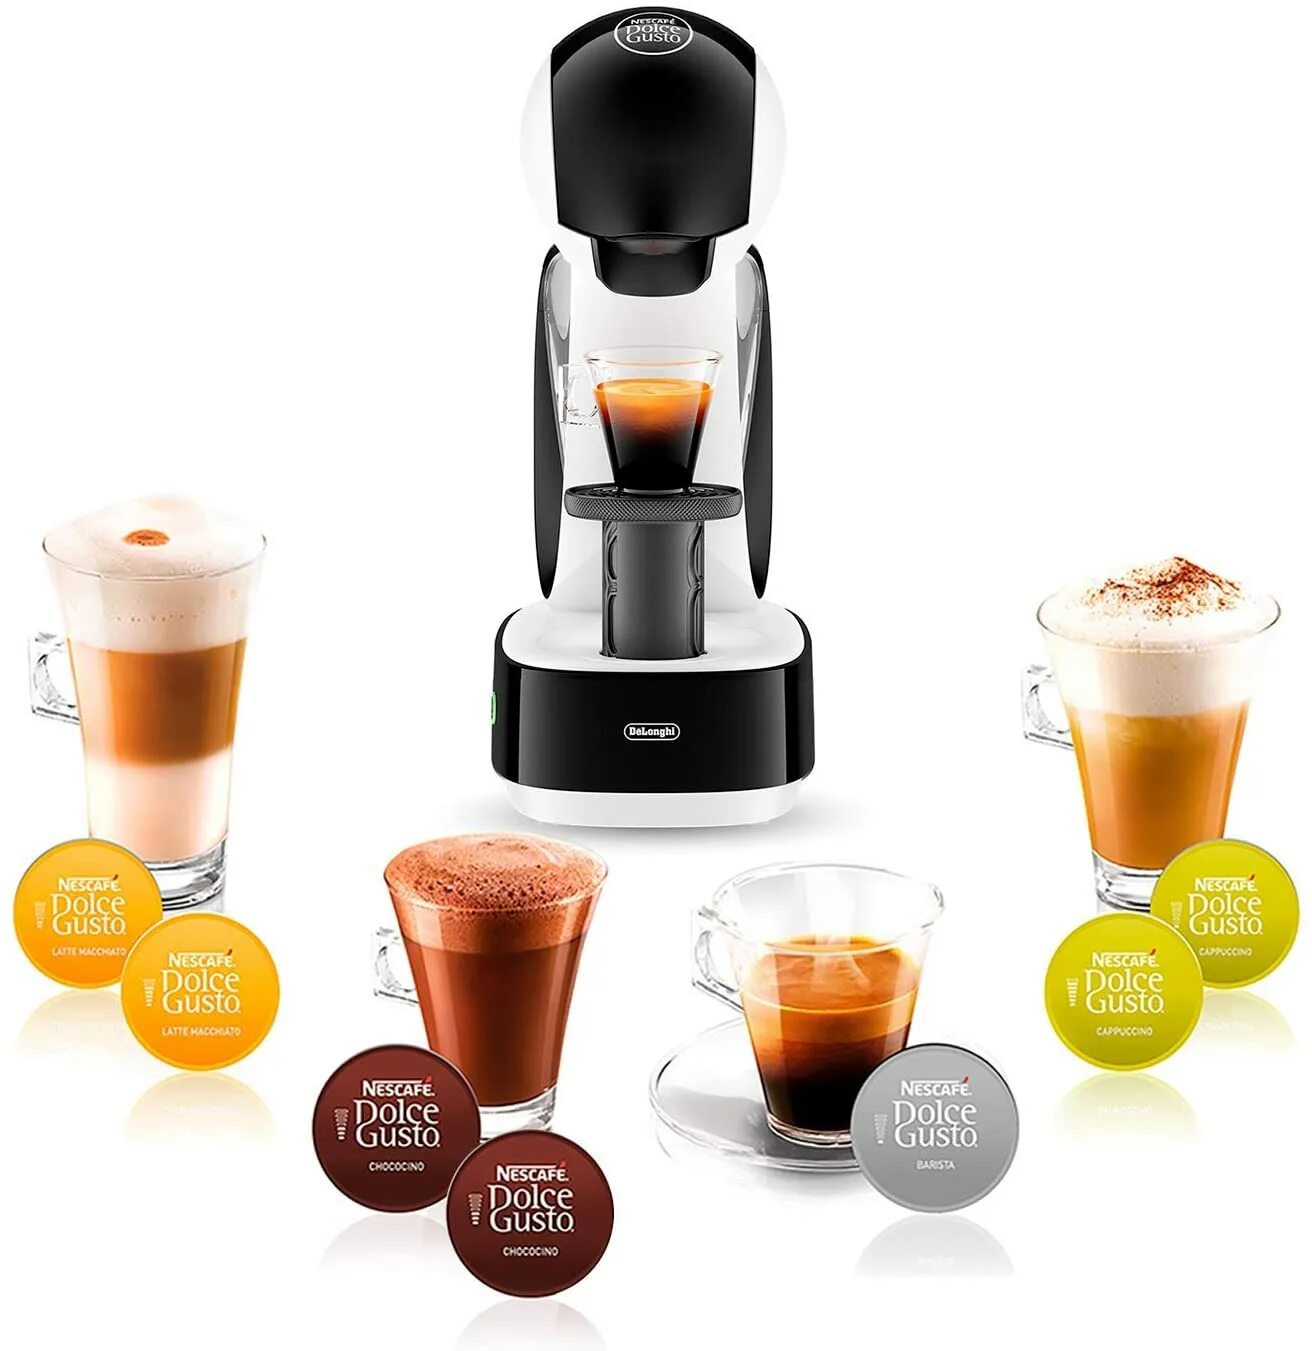 Неспрессо Дольче густо. Nespresso Dolce gusto. Delonghi Dolce gusto. Dolce gusto Infinissima. Dolce gusto xs